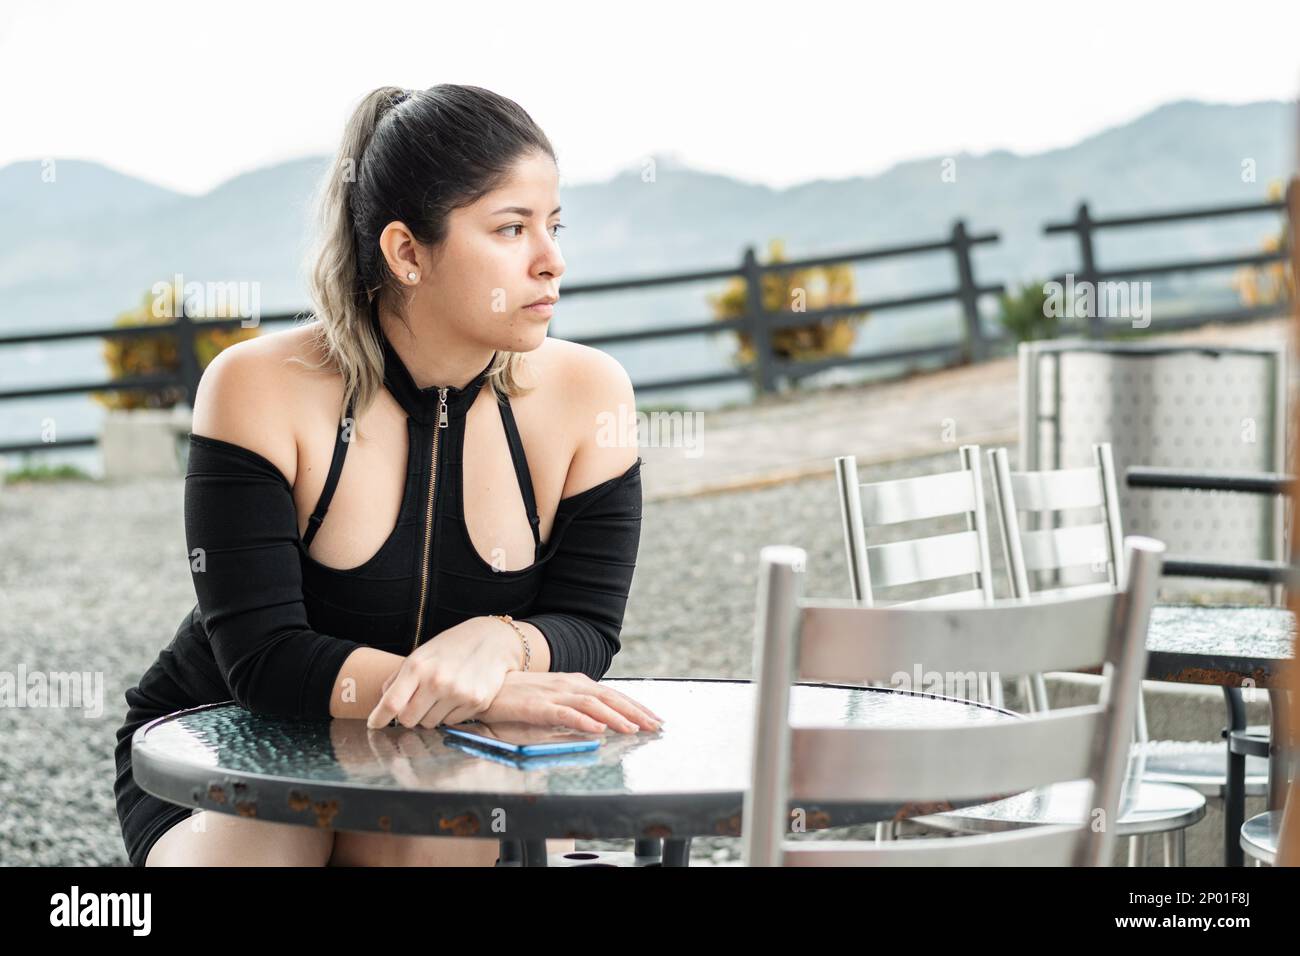 young latina woman, sitting waiting for the food she ordered, in an open-air restaurant Stock Photo